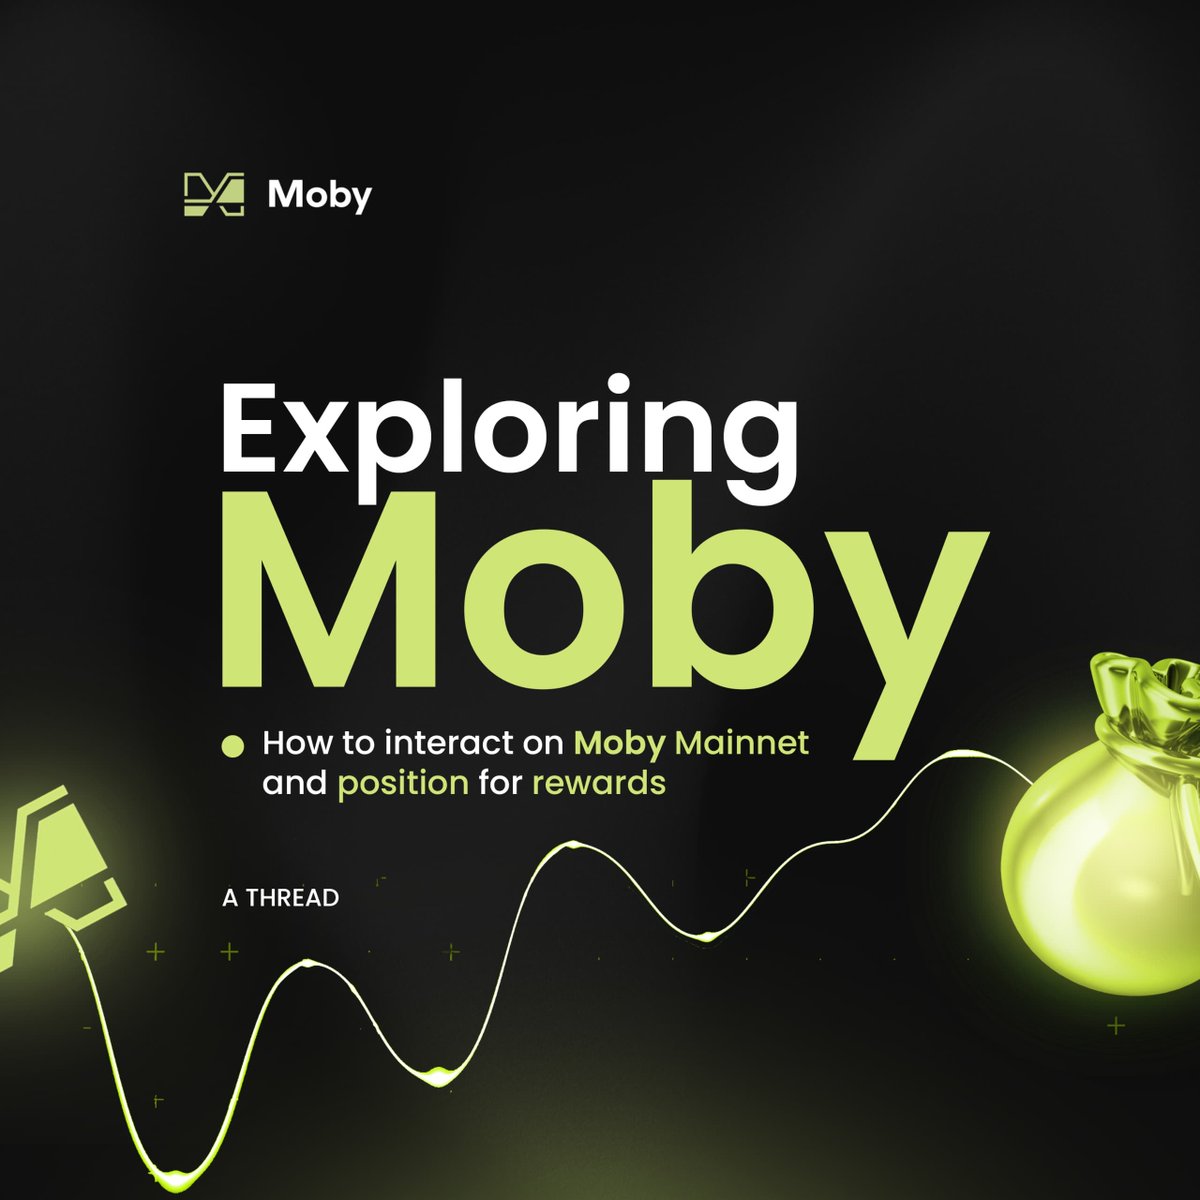 How to interact on Moby Mainet and position for potential rewards

⏲️: 5-10mins

Ever seen 1000x leverage with no liquidation risk???Don't fade @Moby_trade

Moby is an on-chain options protocol powered by its Synchronized Liquidity Engine (SLE).

Here's the guide. 🧵